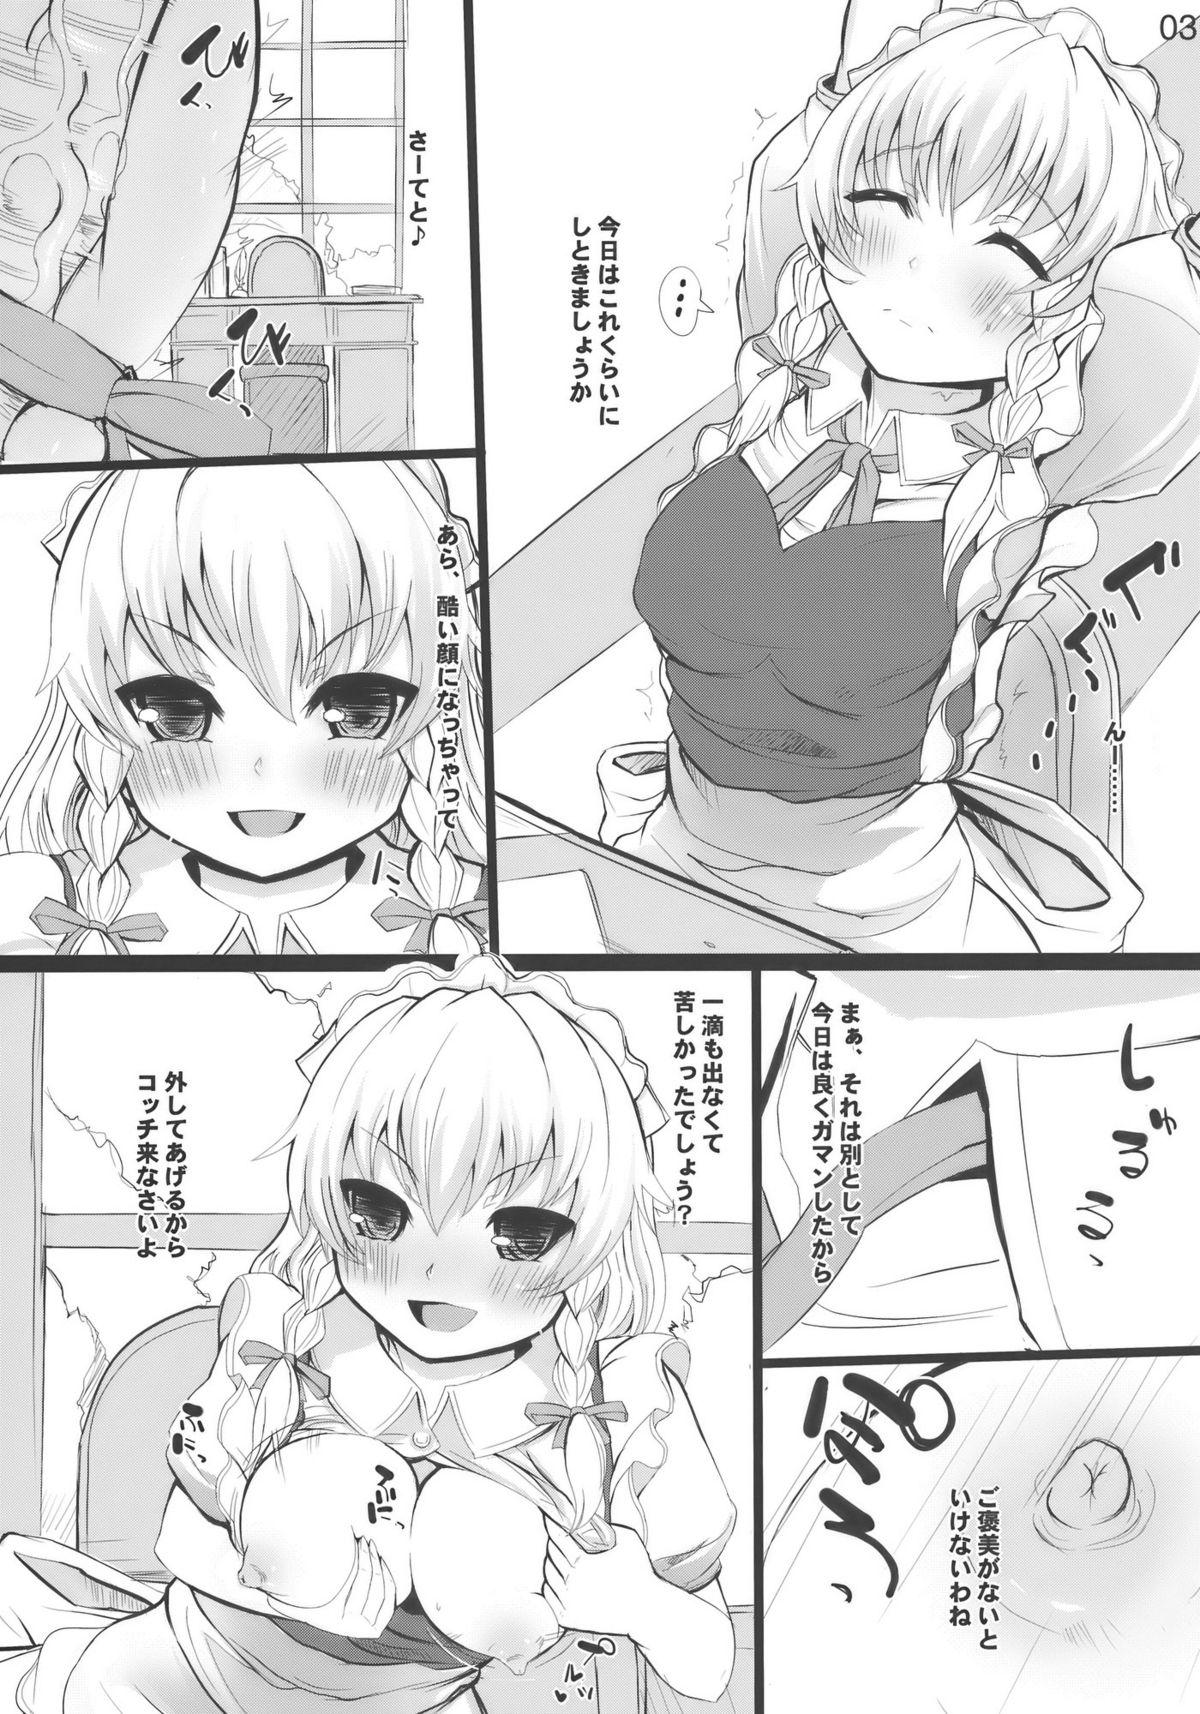 Gay Blondhair Feed me with your Kiss - Touhou project Wife - Page 3